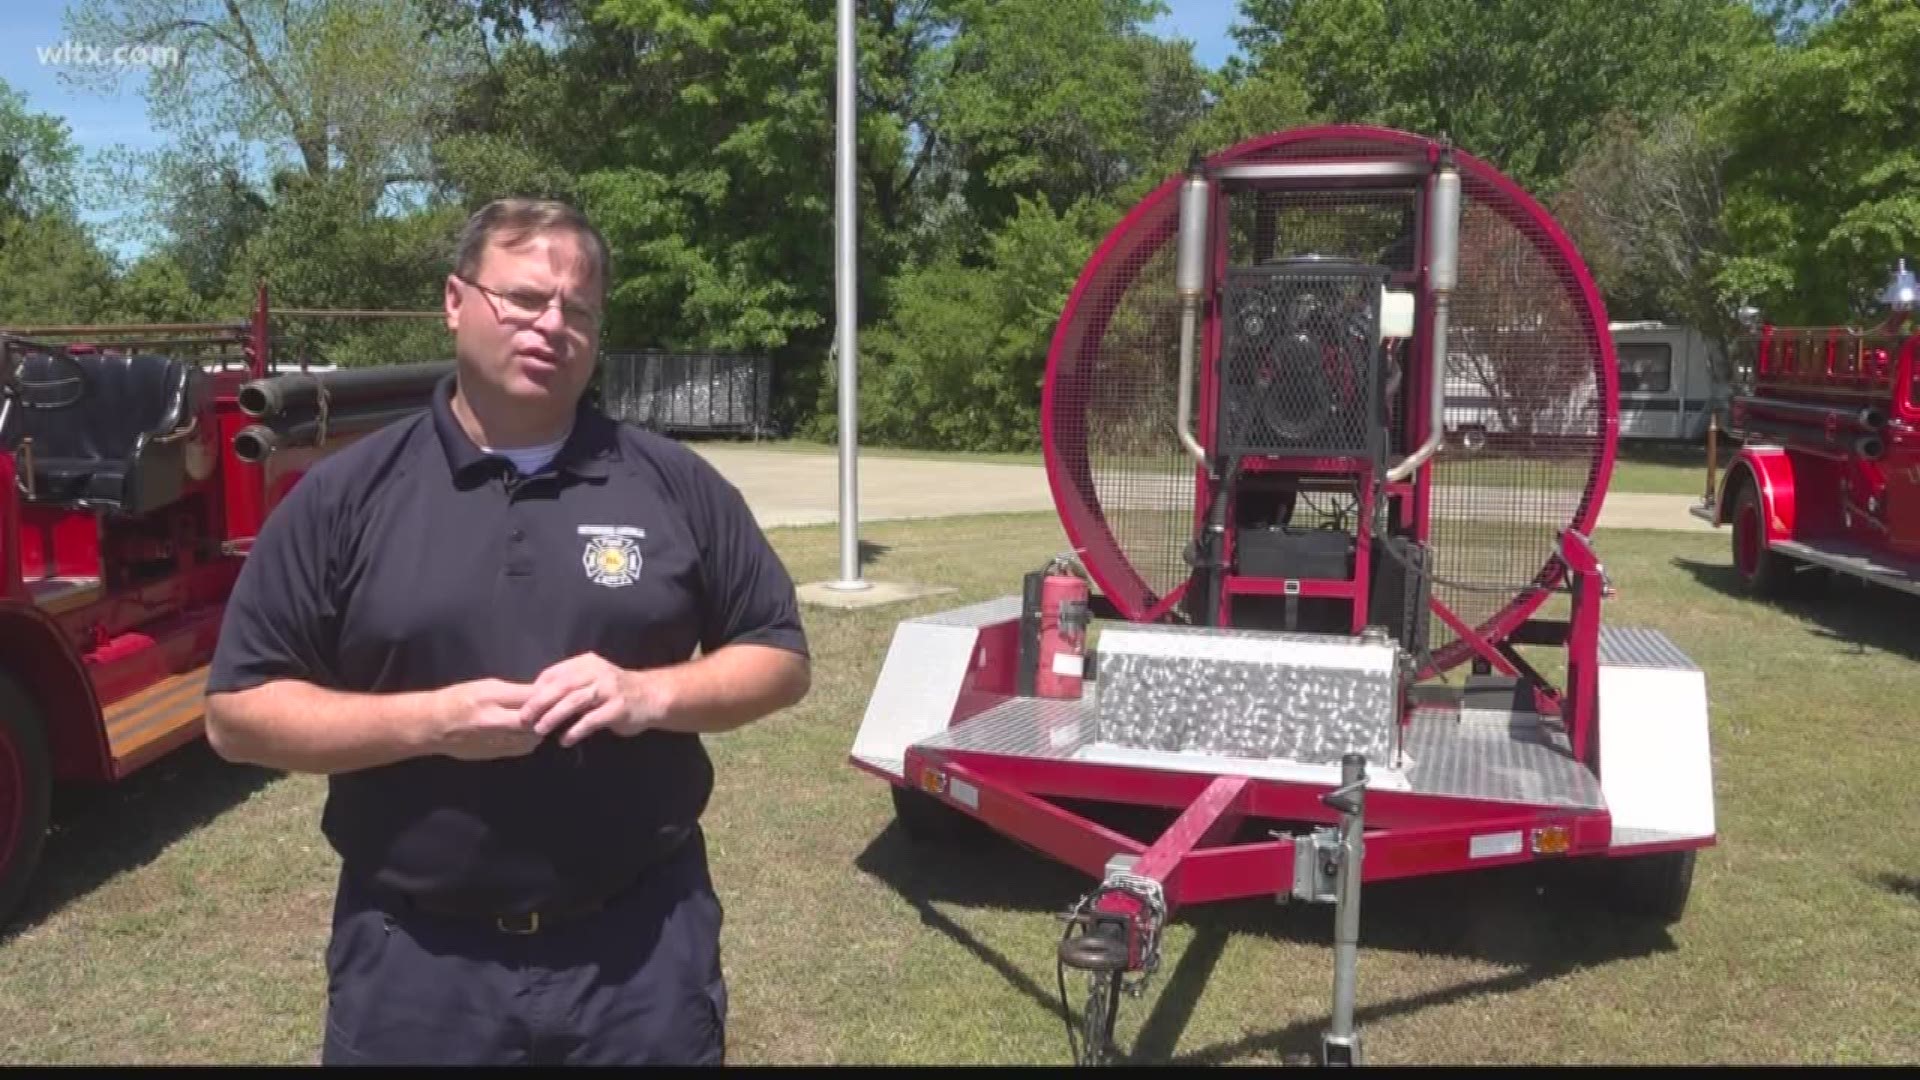 The Vent25 is a device that can clear large amount of smoke from buildings, and Batesburg-Leesville has one.